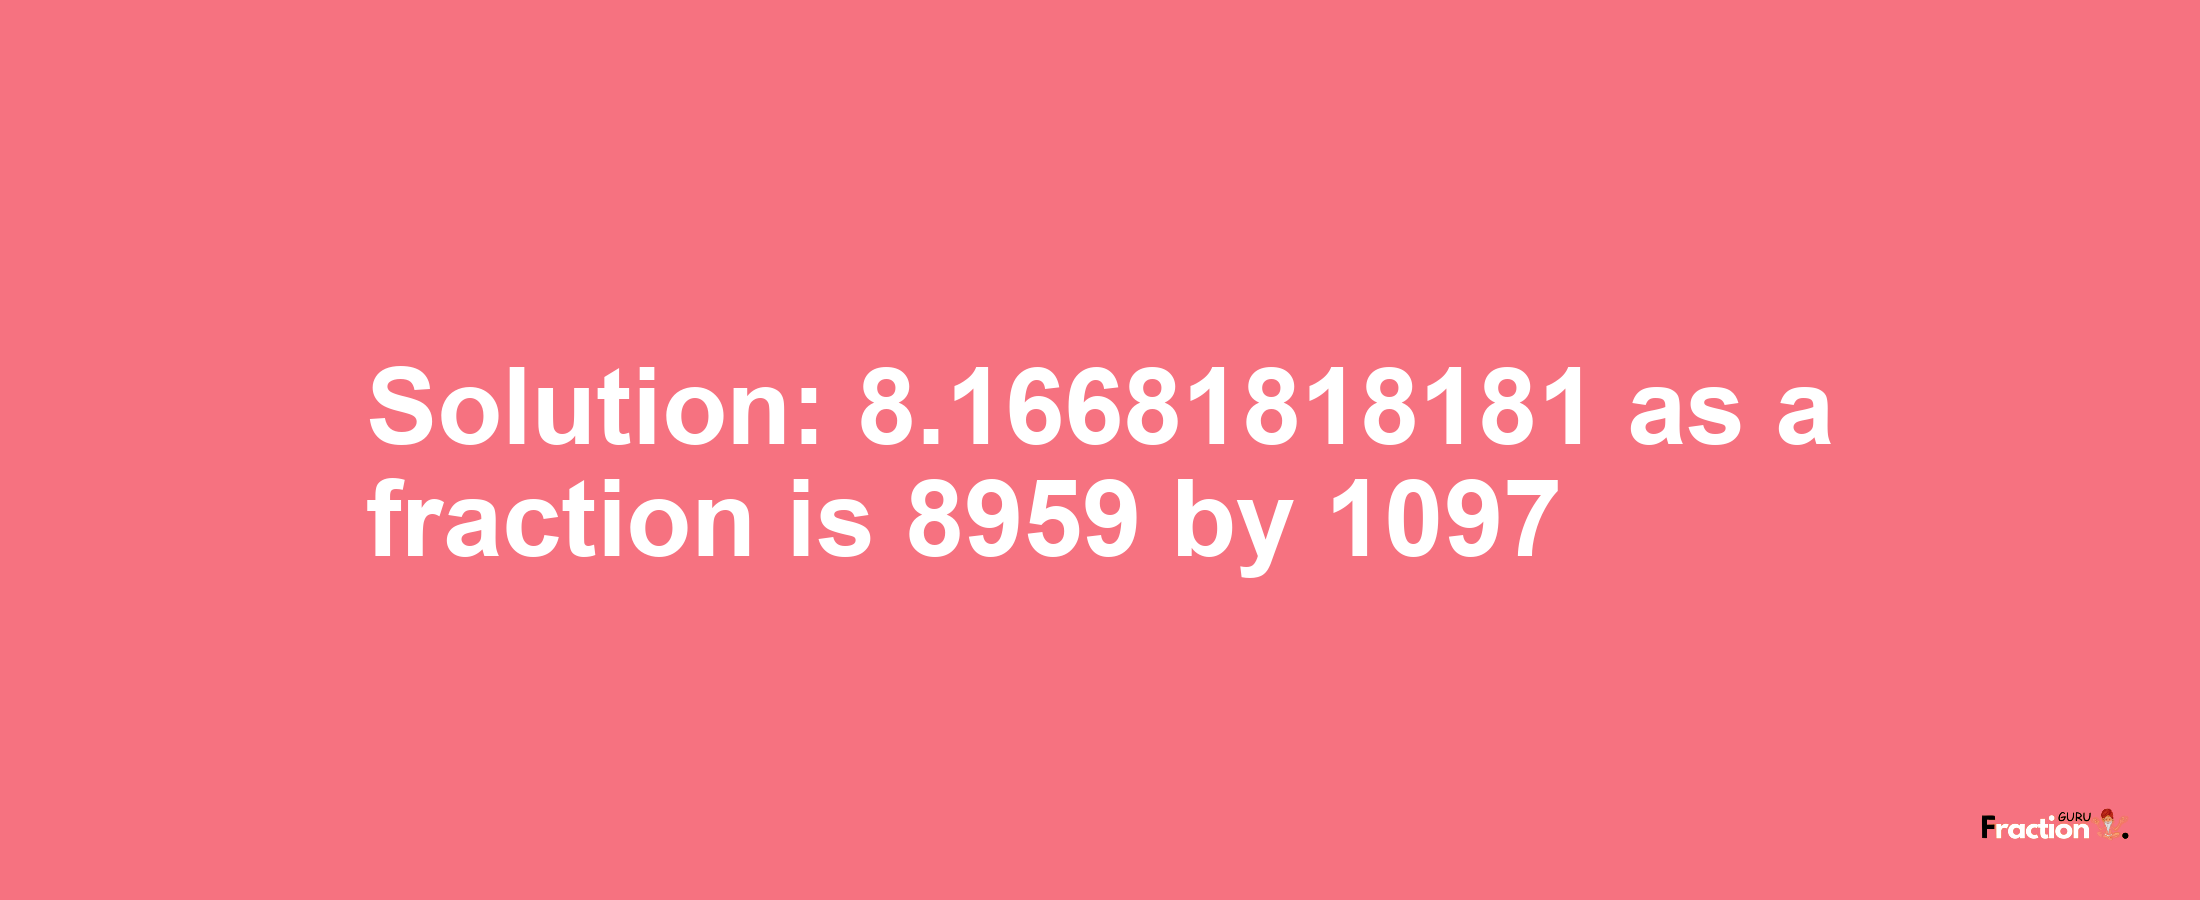 Solution:8.16681818181 as a fraction is 8959/1097